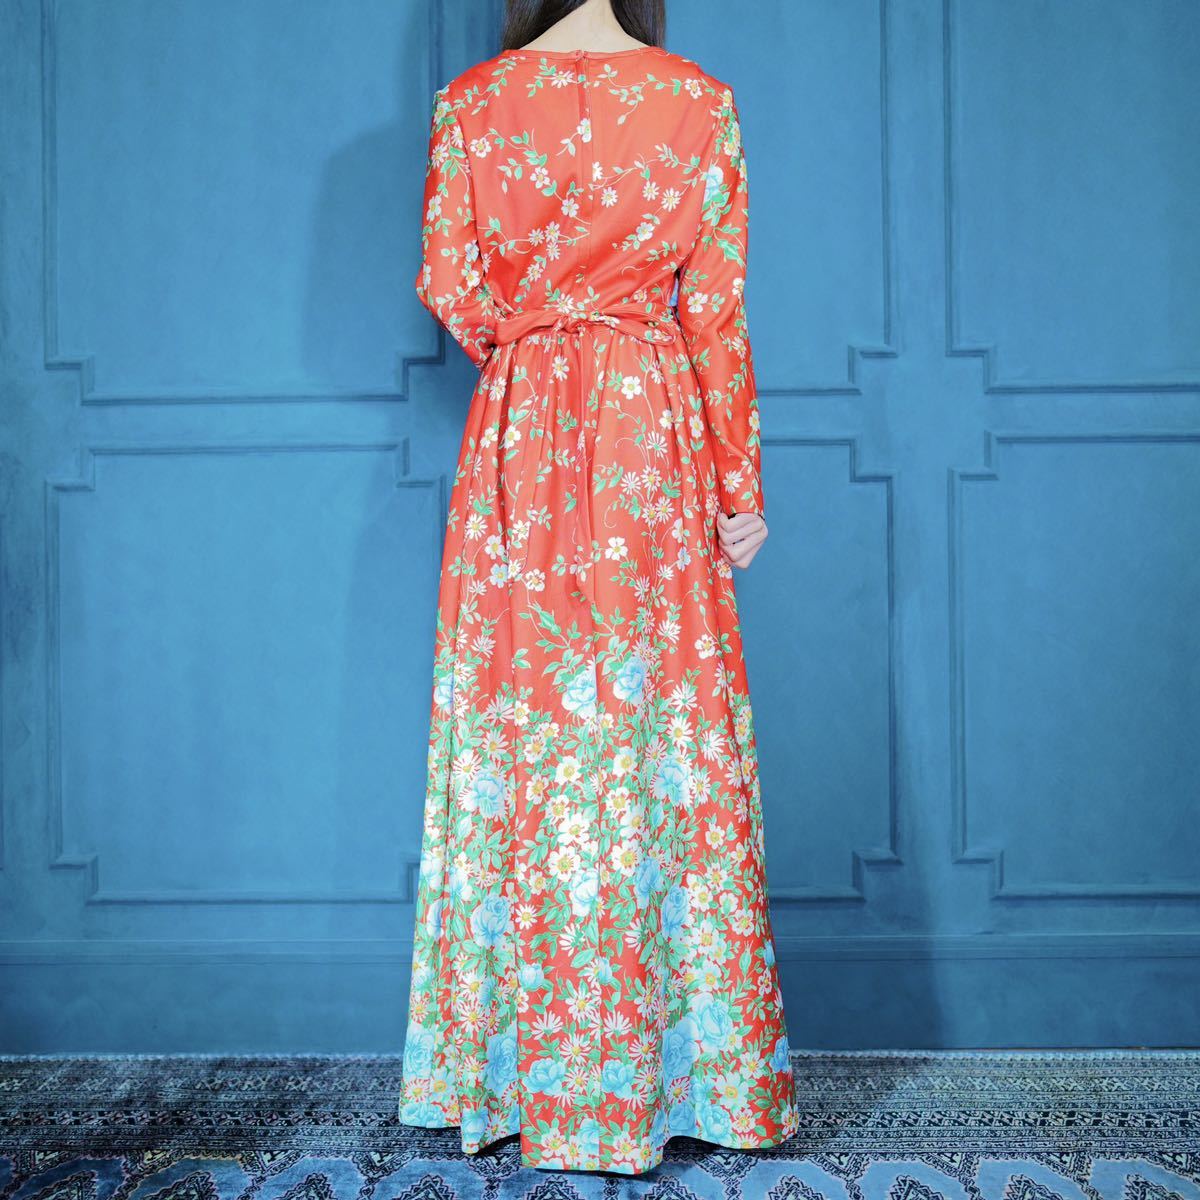 70's USA VINTAGE FLOWER PATTERNED BELTED LONG DRESS ONE PIECE/70年代アメリカ古着花柄ベルテッドロングドレスワンピース_画像4